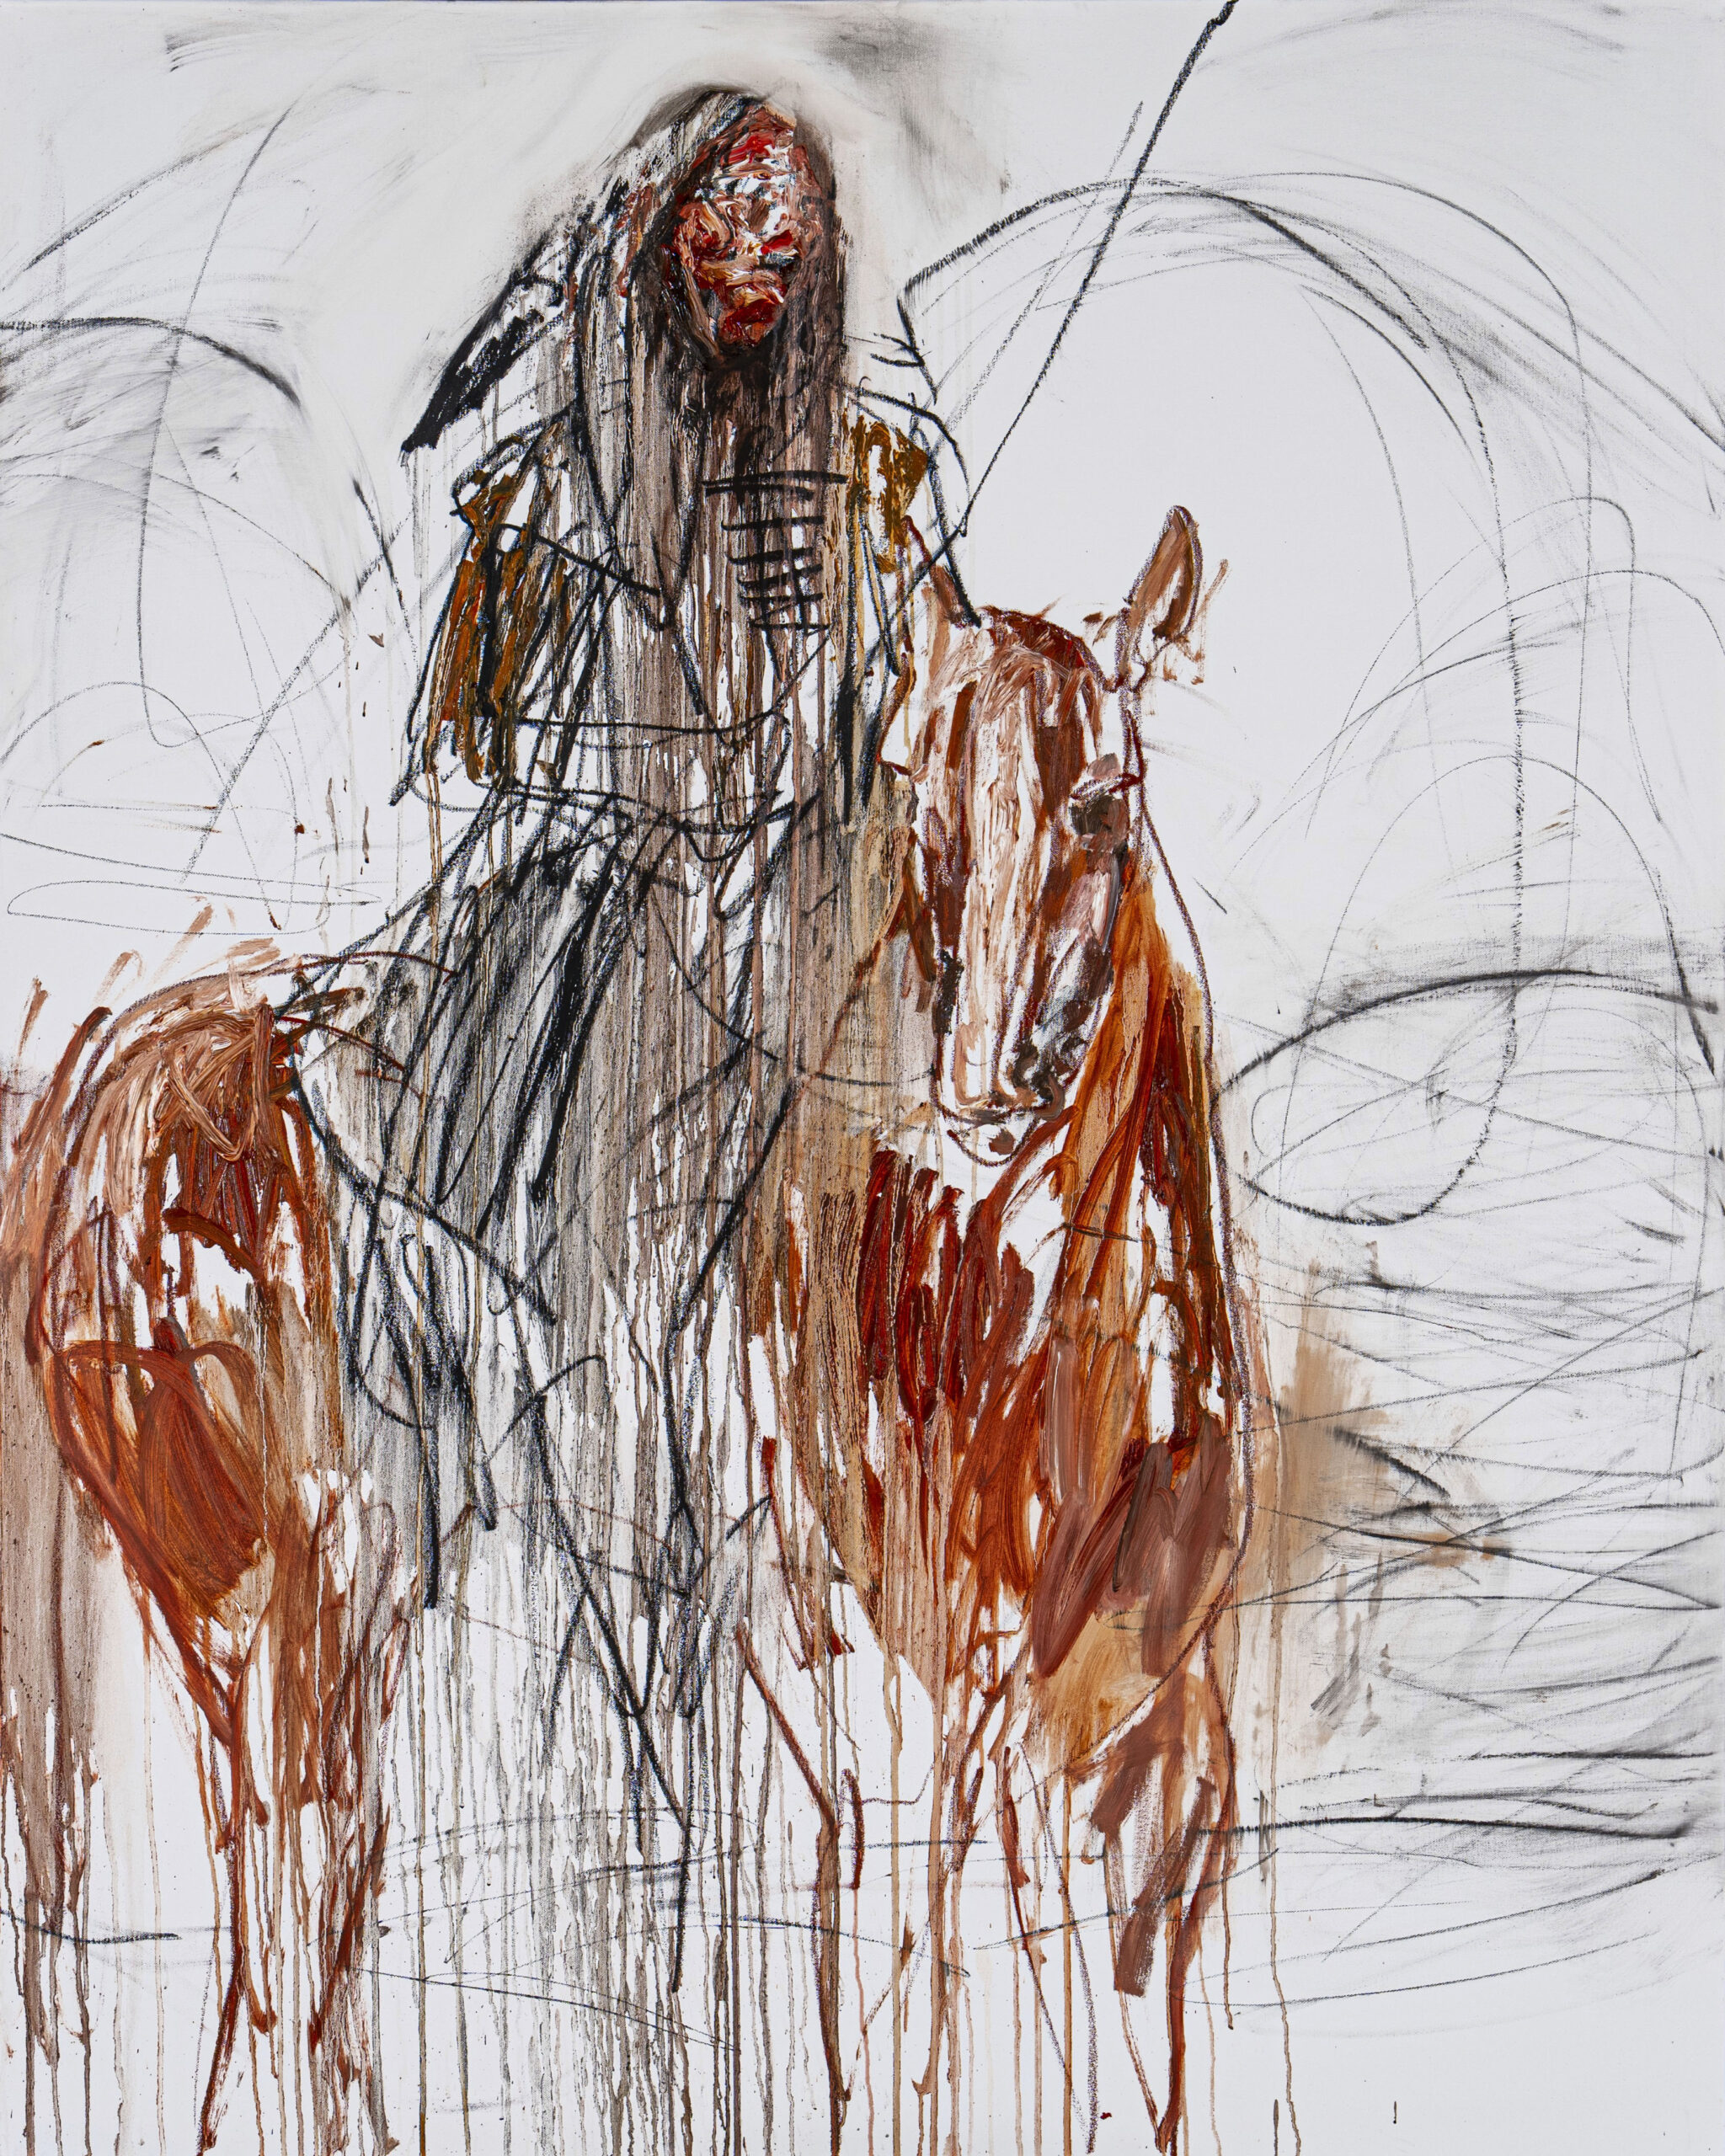 
							

									Patrick Dean Hubbell									Hear Us: American Western Art 2023									oil, oil stick, charcoal on canvas, wood lattice strip frame<br />
60 x 48 x 1 3/4 inches									


							